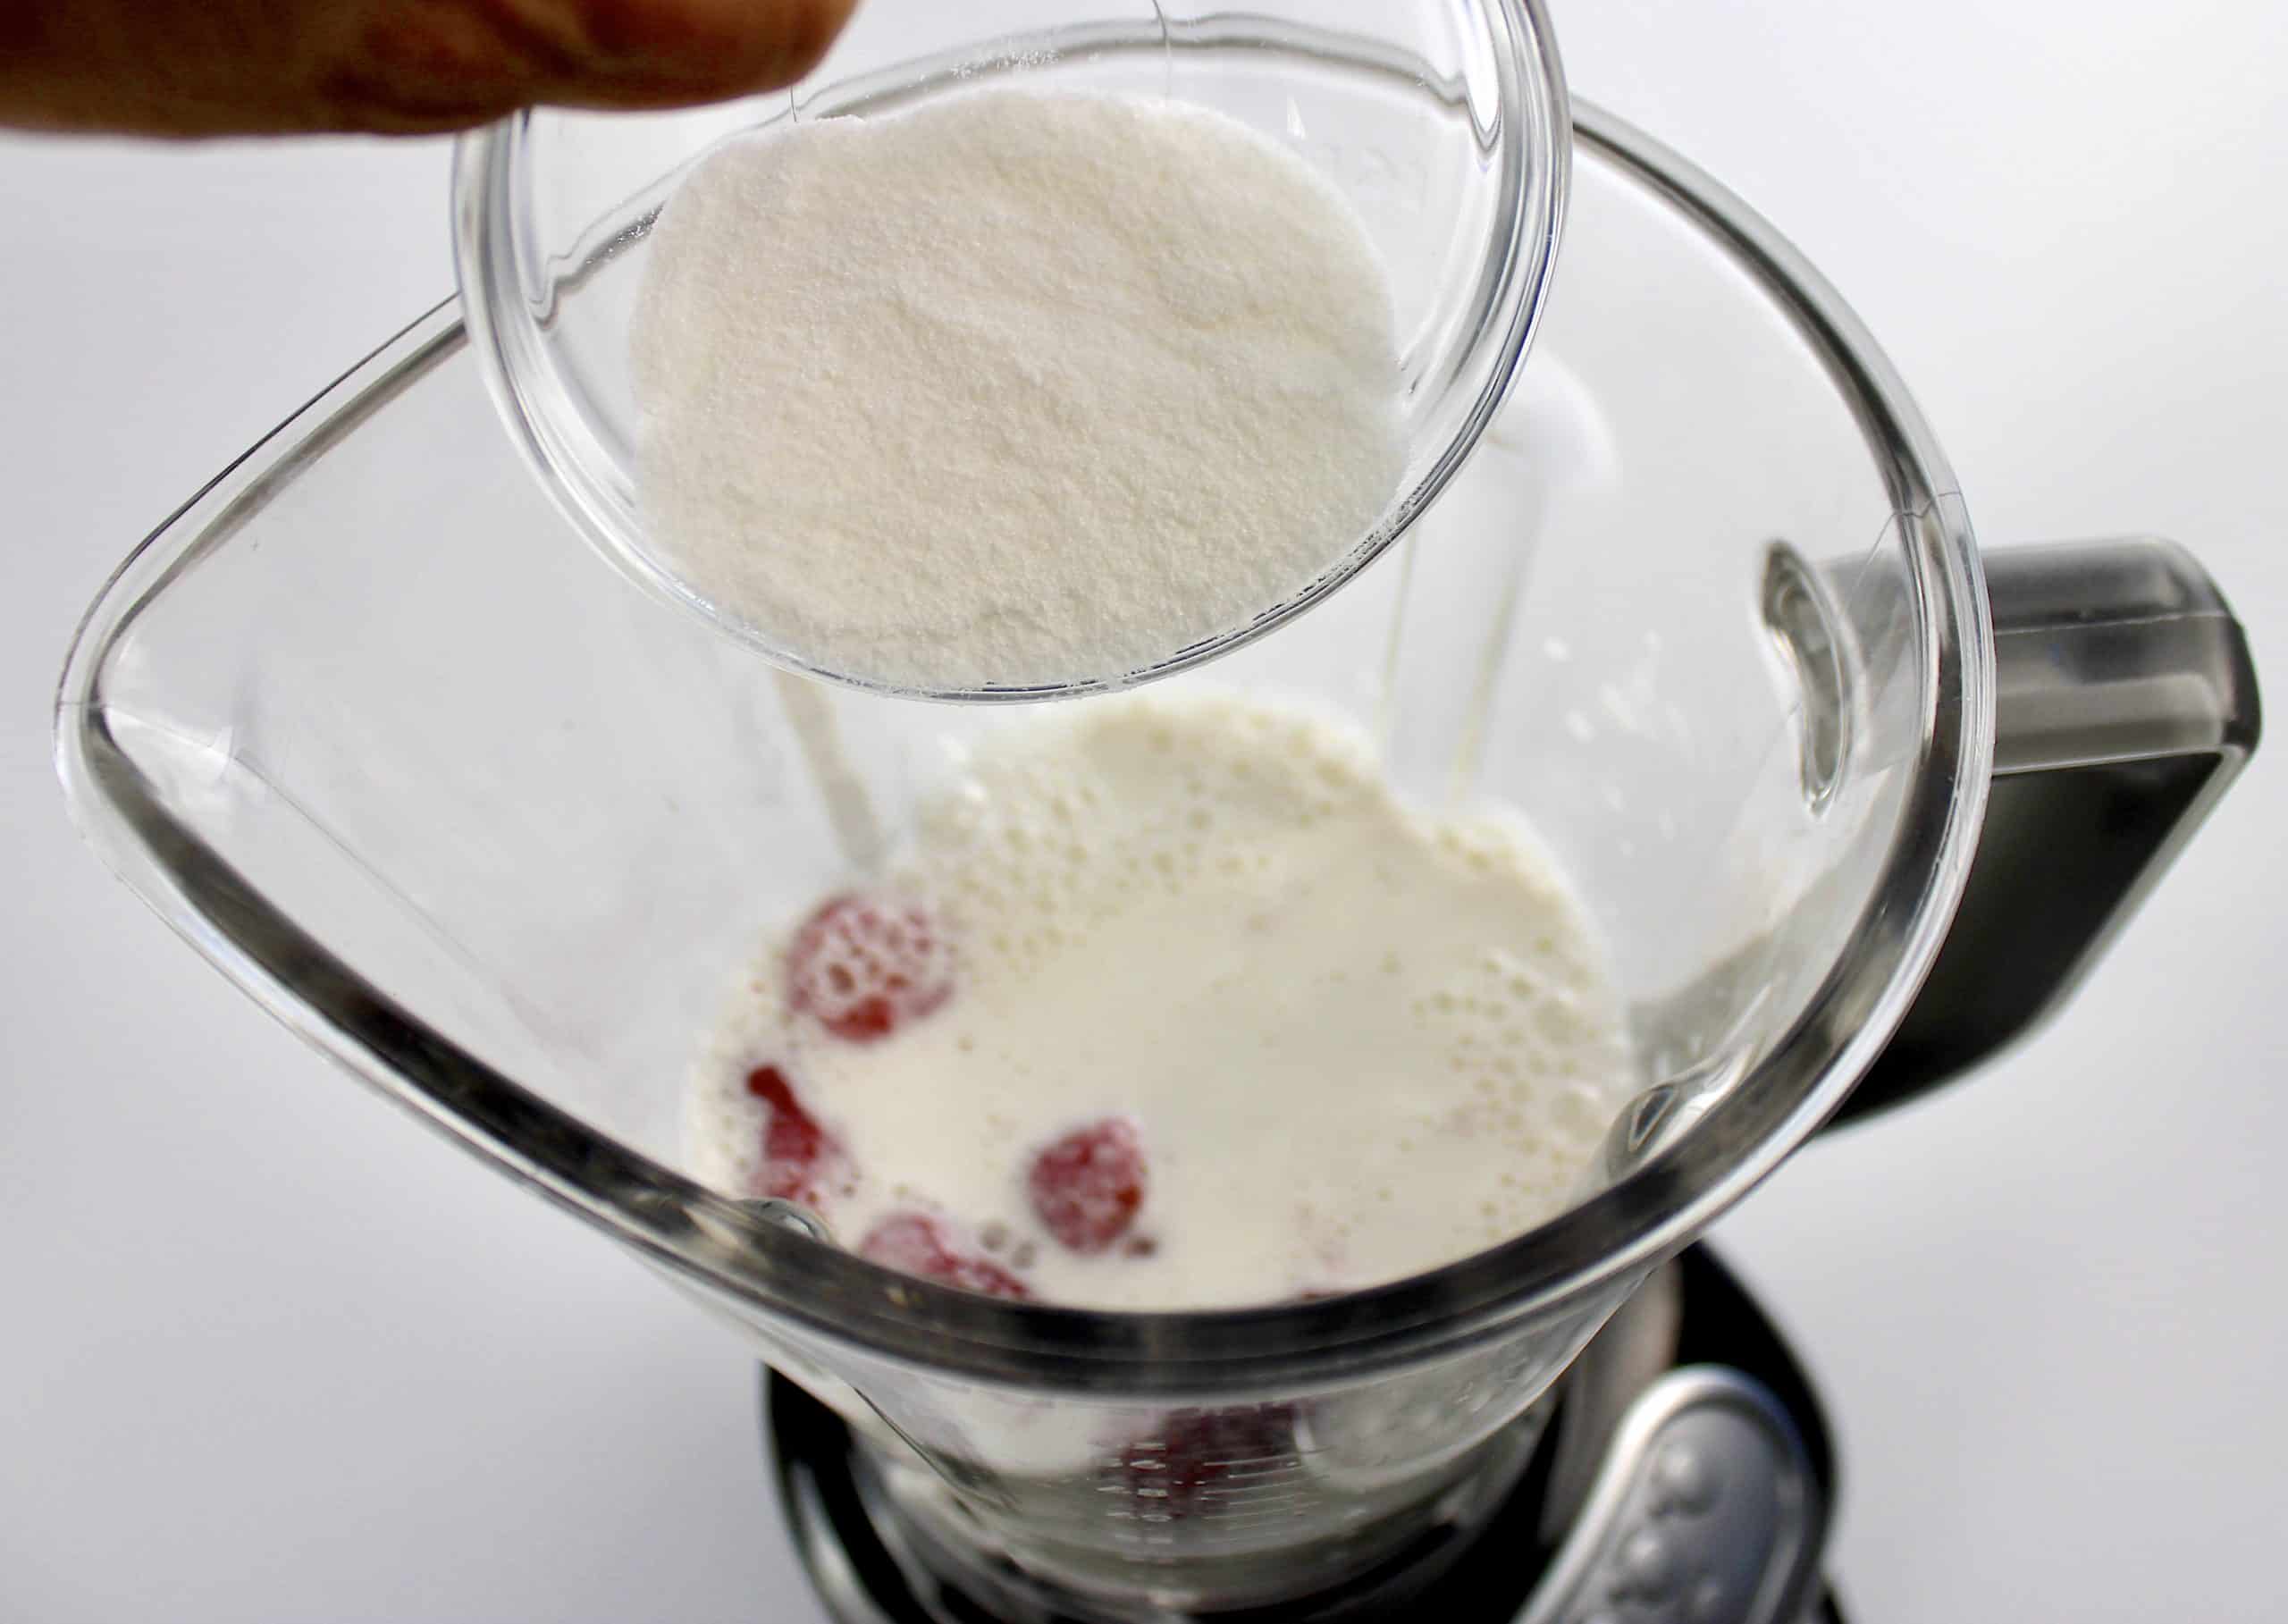 sweetener being poured into blender with milk and berries